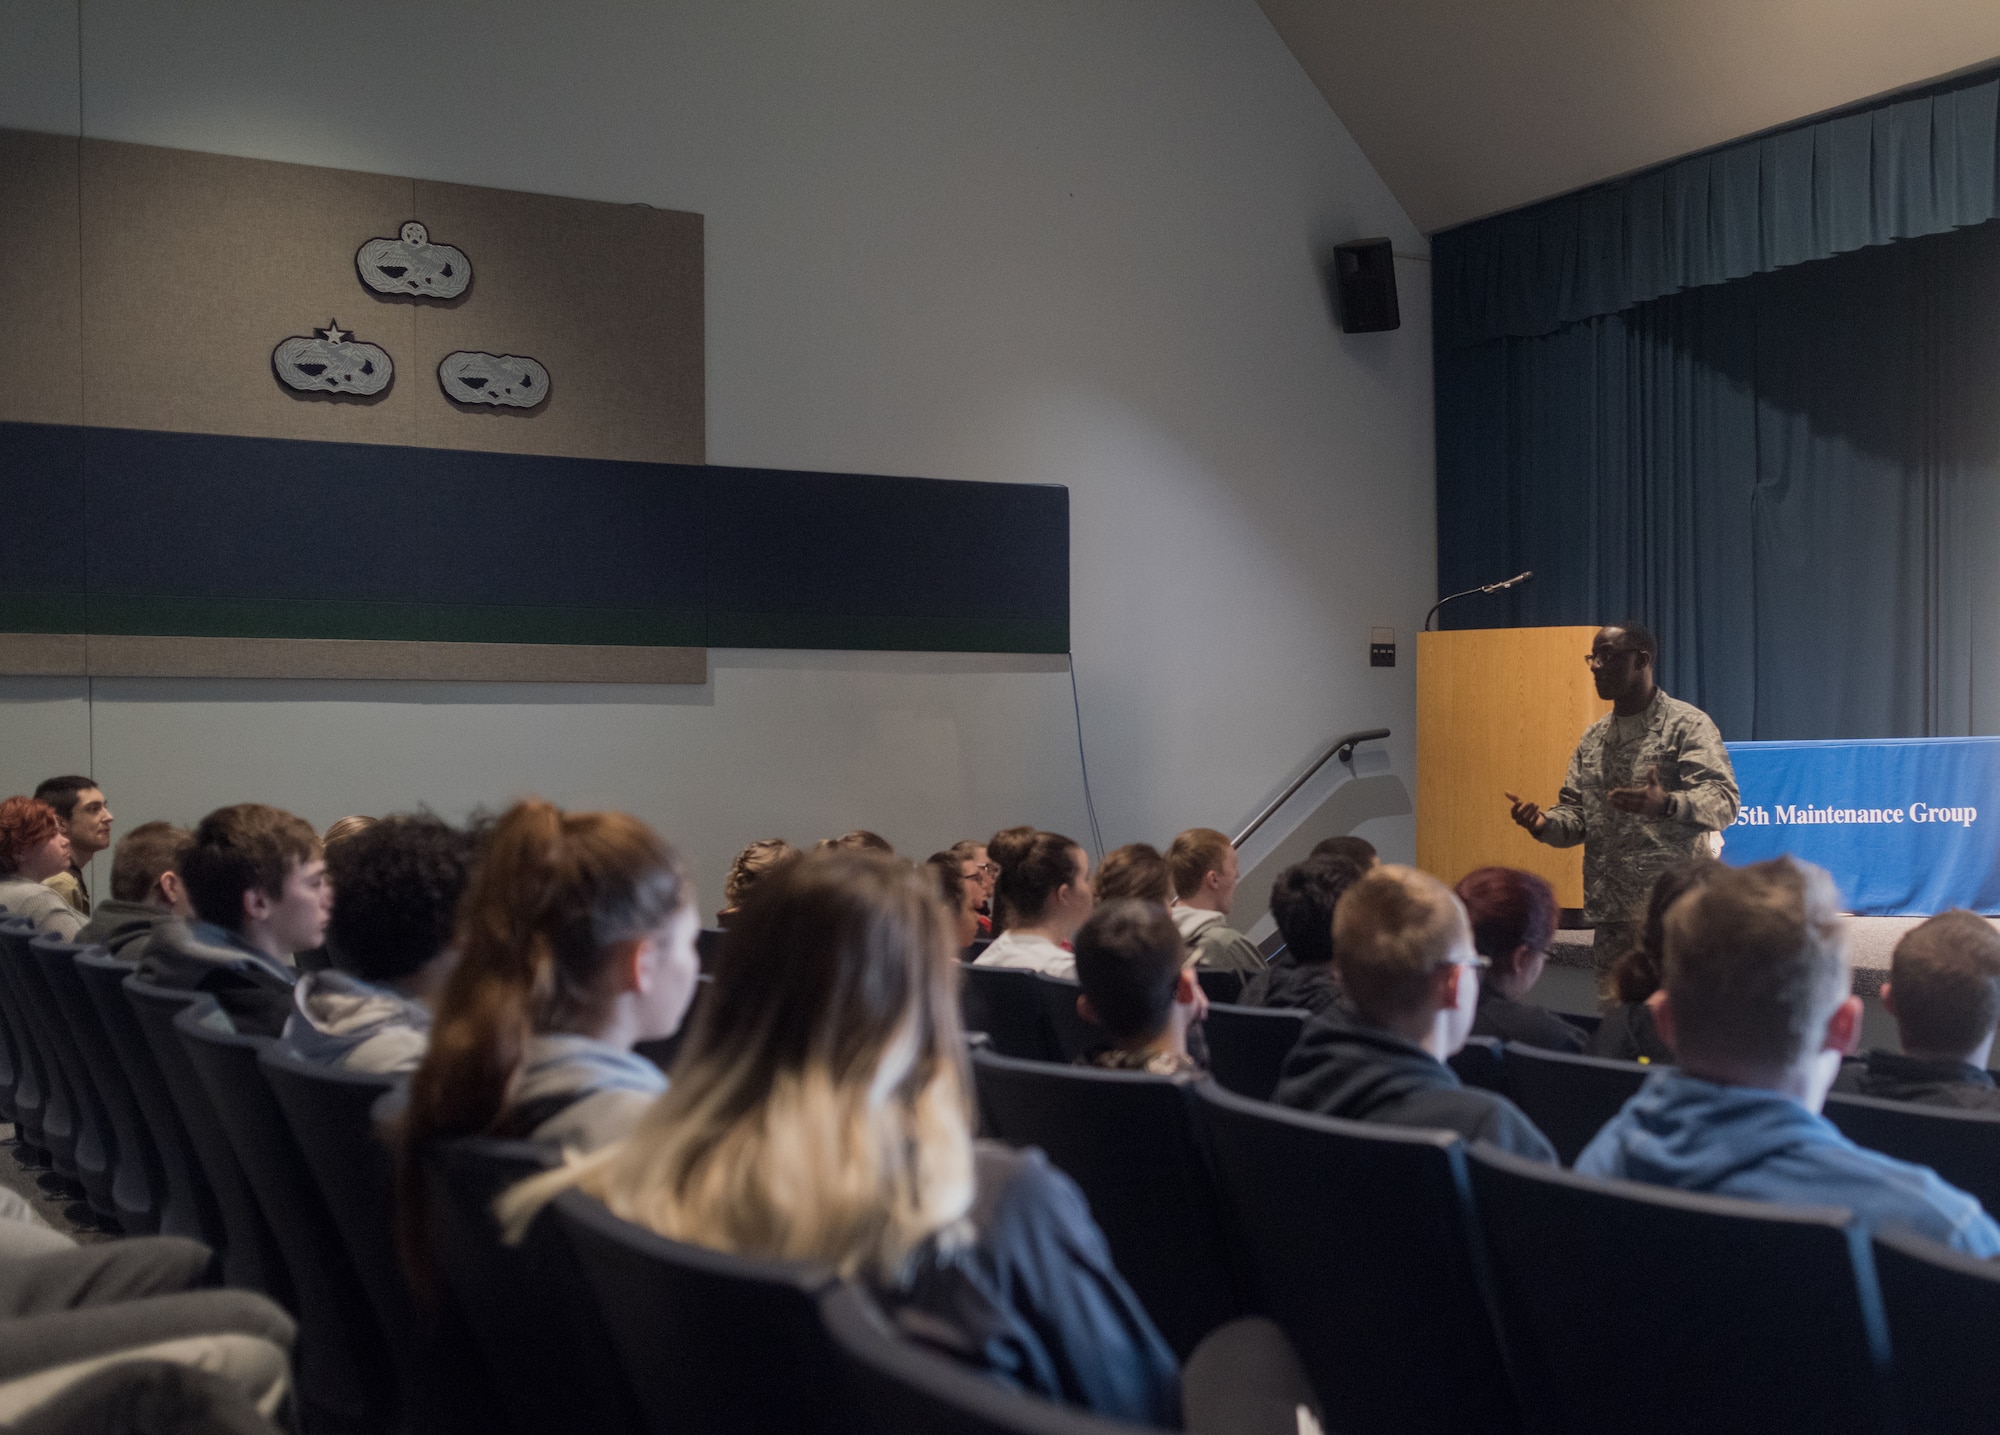 U.S. Air Force Maj. Julian Thomas, 55th Maintenance Squadron commander, speaks with students from Bellevue East High School Feb. 27, 2018 at Offutt Air Force Base, Nebraska. The tour, which was the first of its kind, provided students a chance to see into the world of aircraft maintenance and reflect on real world applications of what they’ve learned in school. (U.S. Air Force photo by Senior Airman Jacob Skovo)